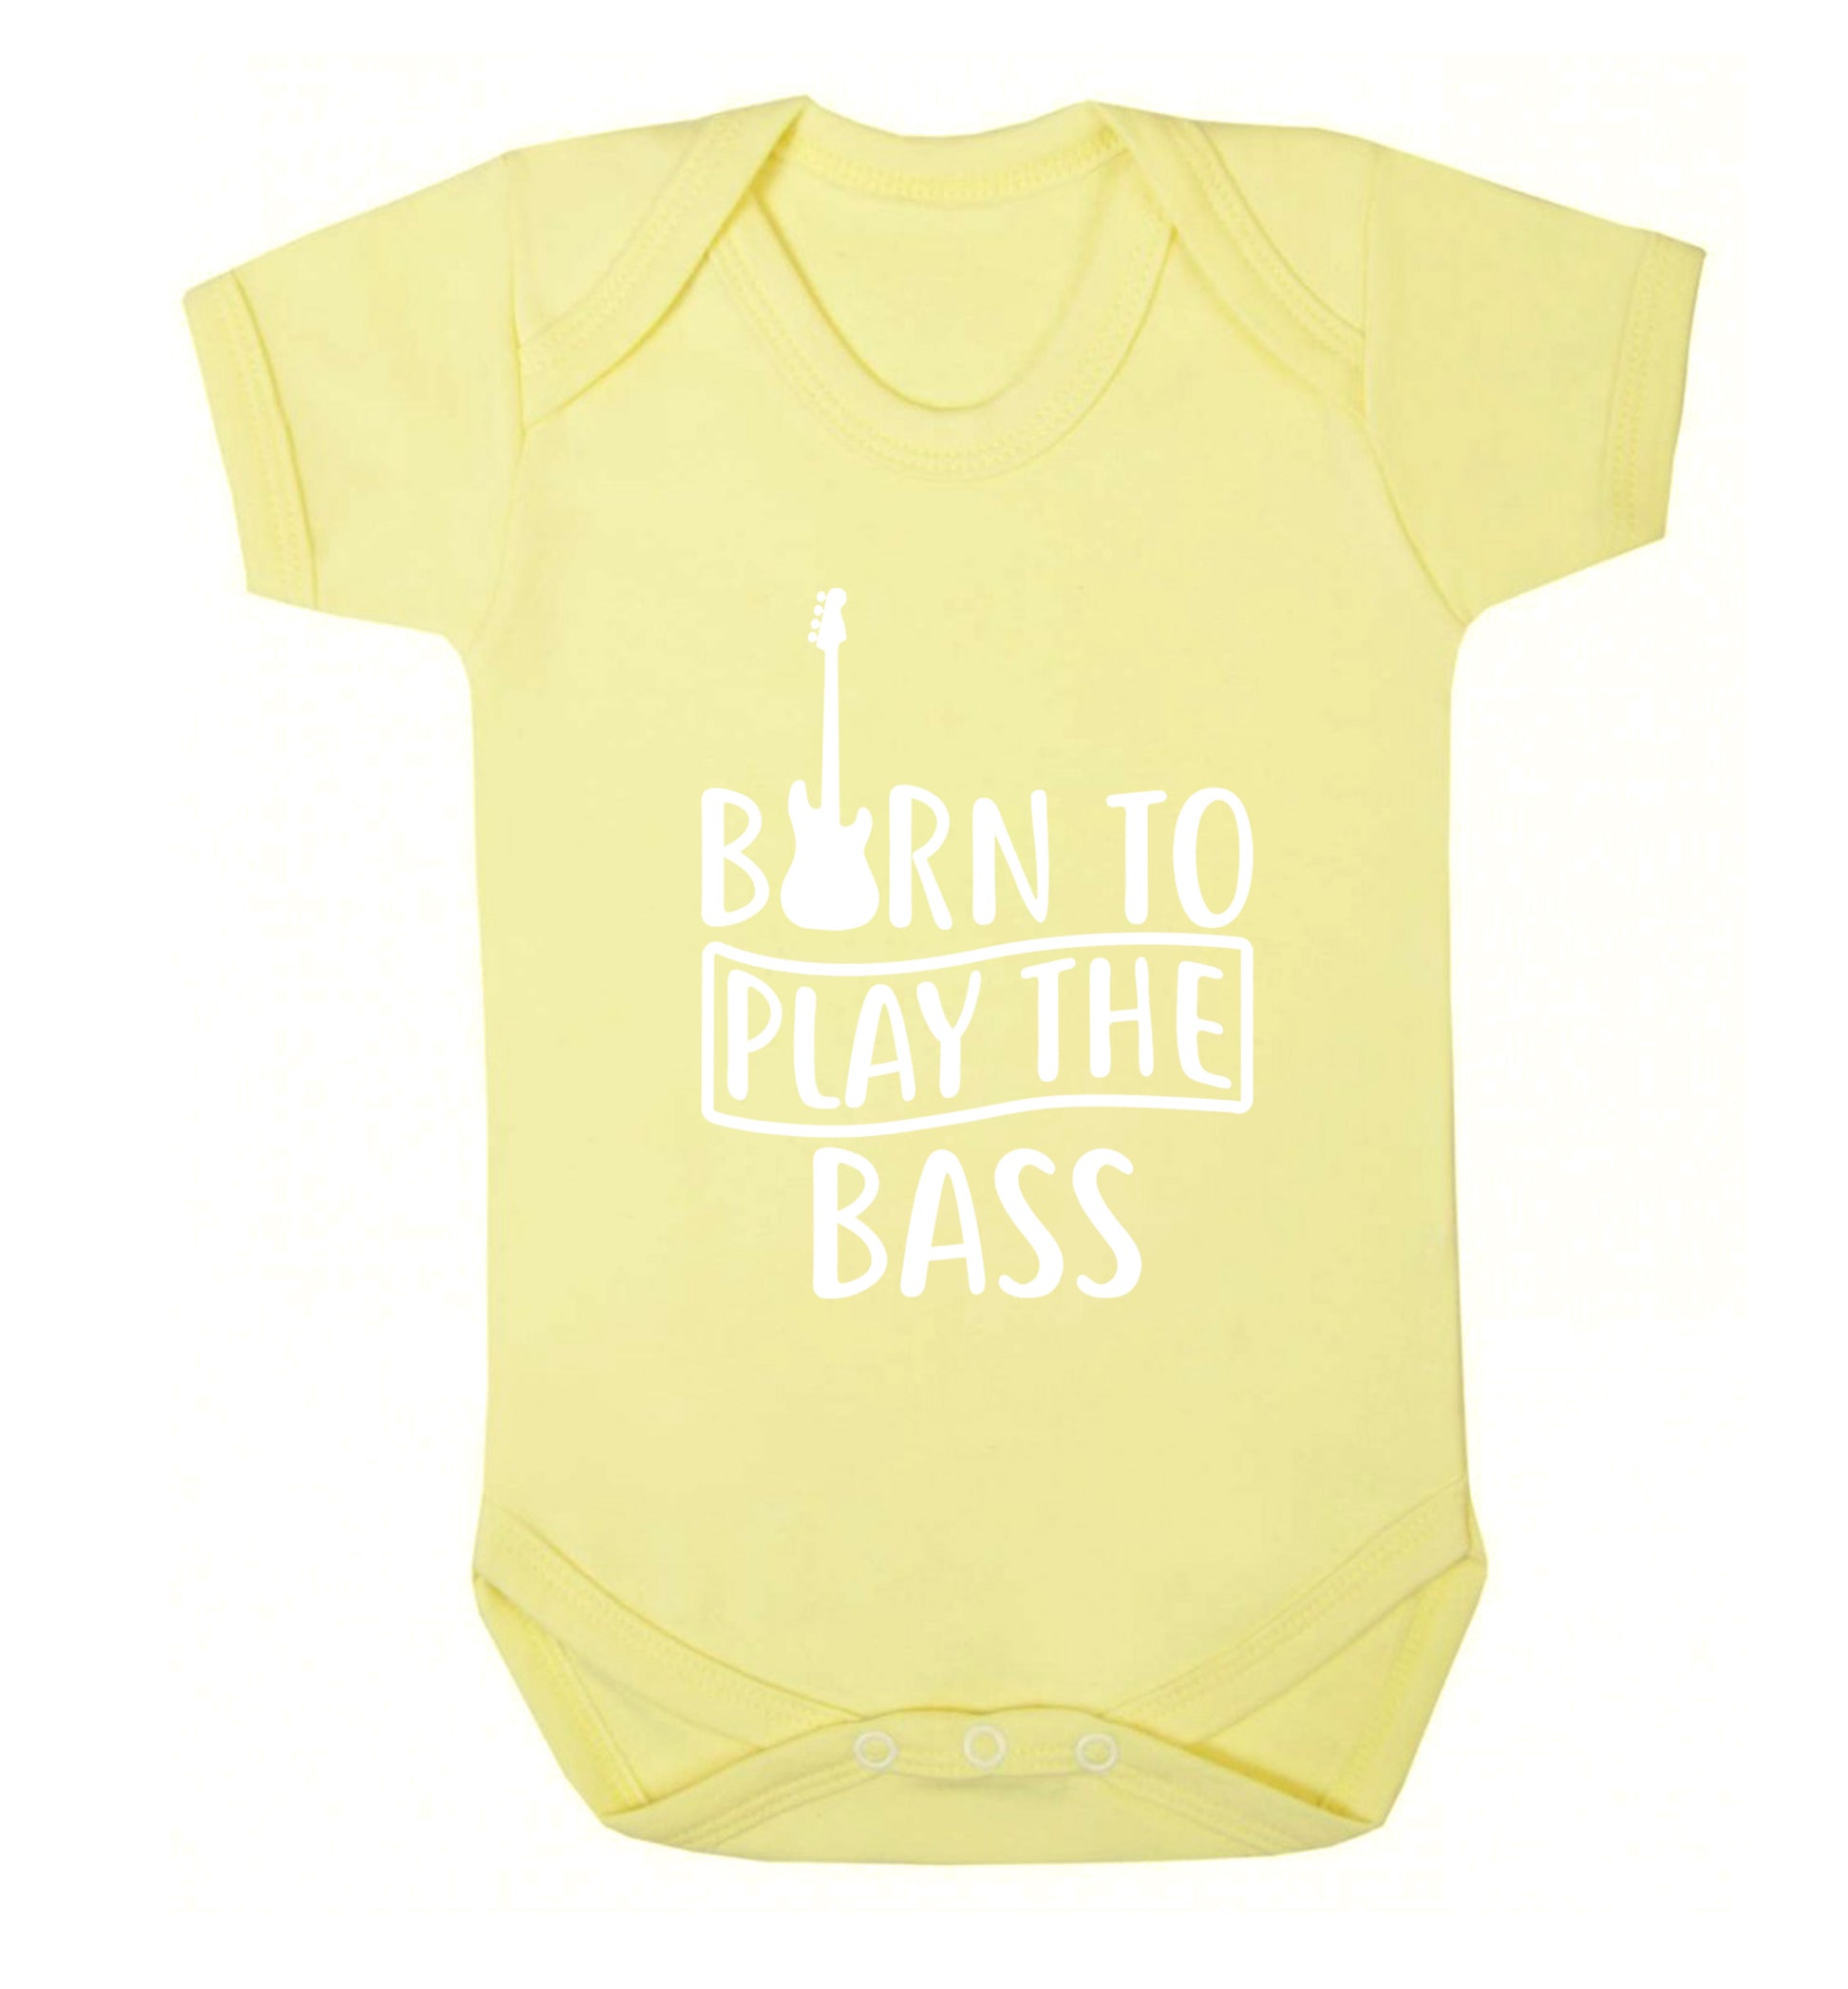 Born to play the bass Baby Vest pale yellow 18-24 months